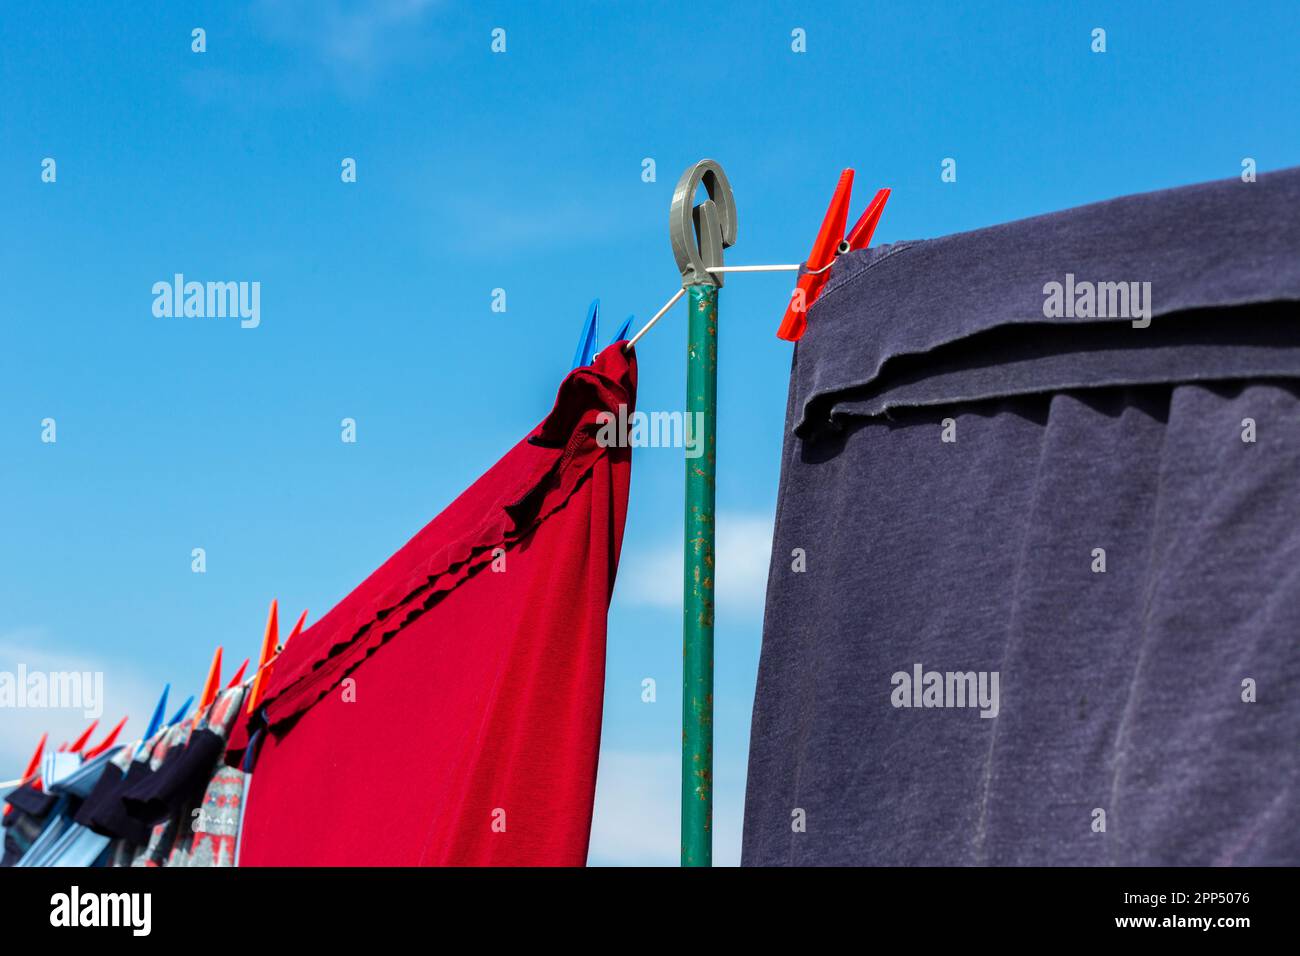 Clothes drying on a washing line with blue sky Stock Photo